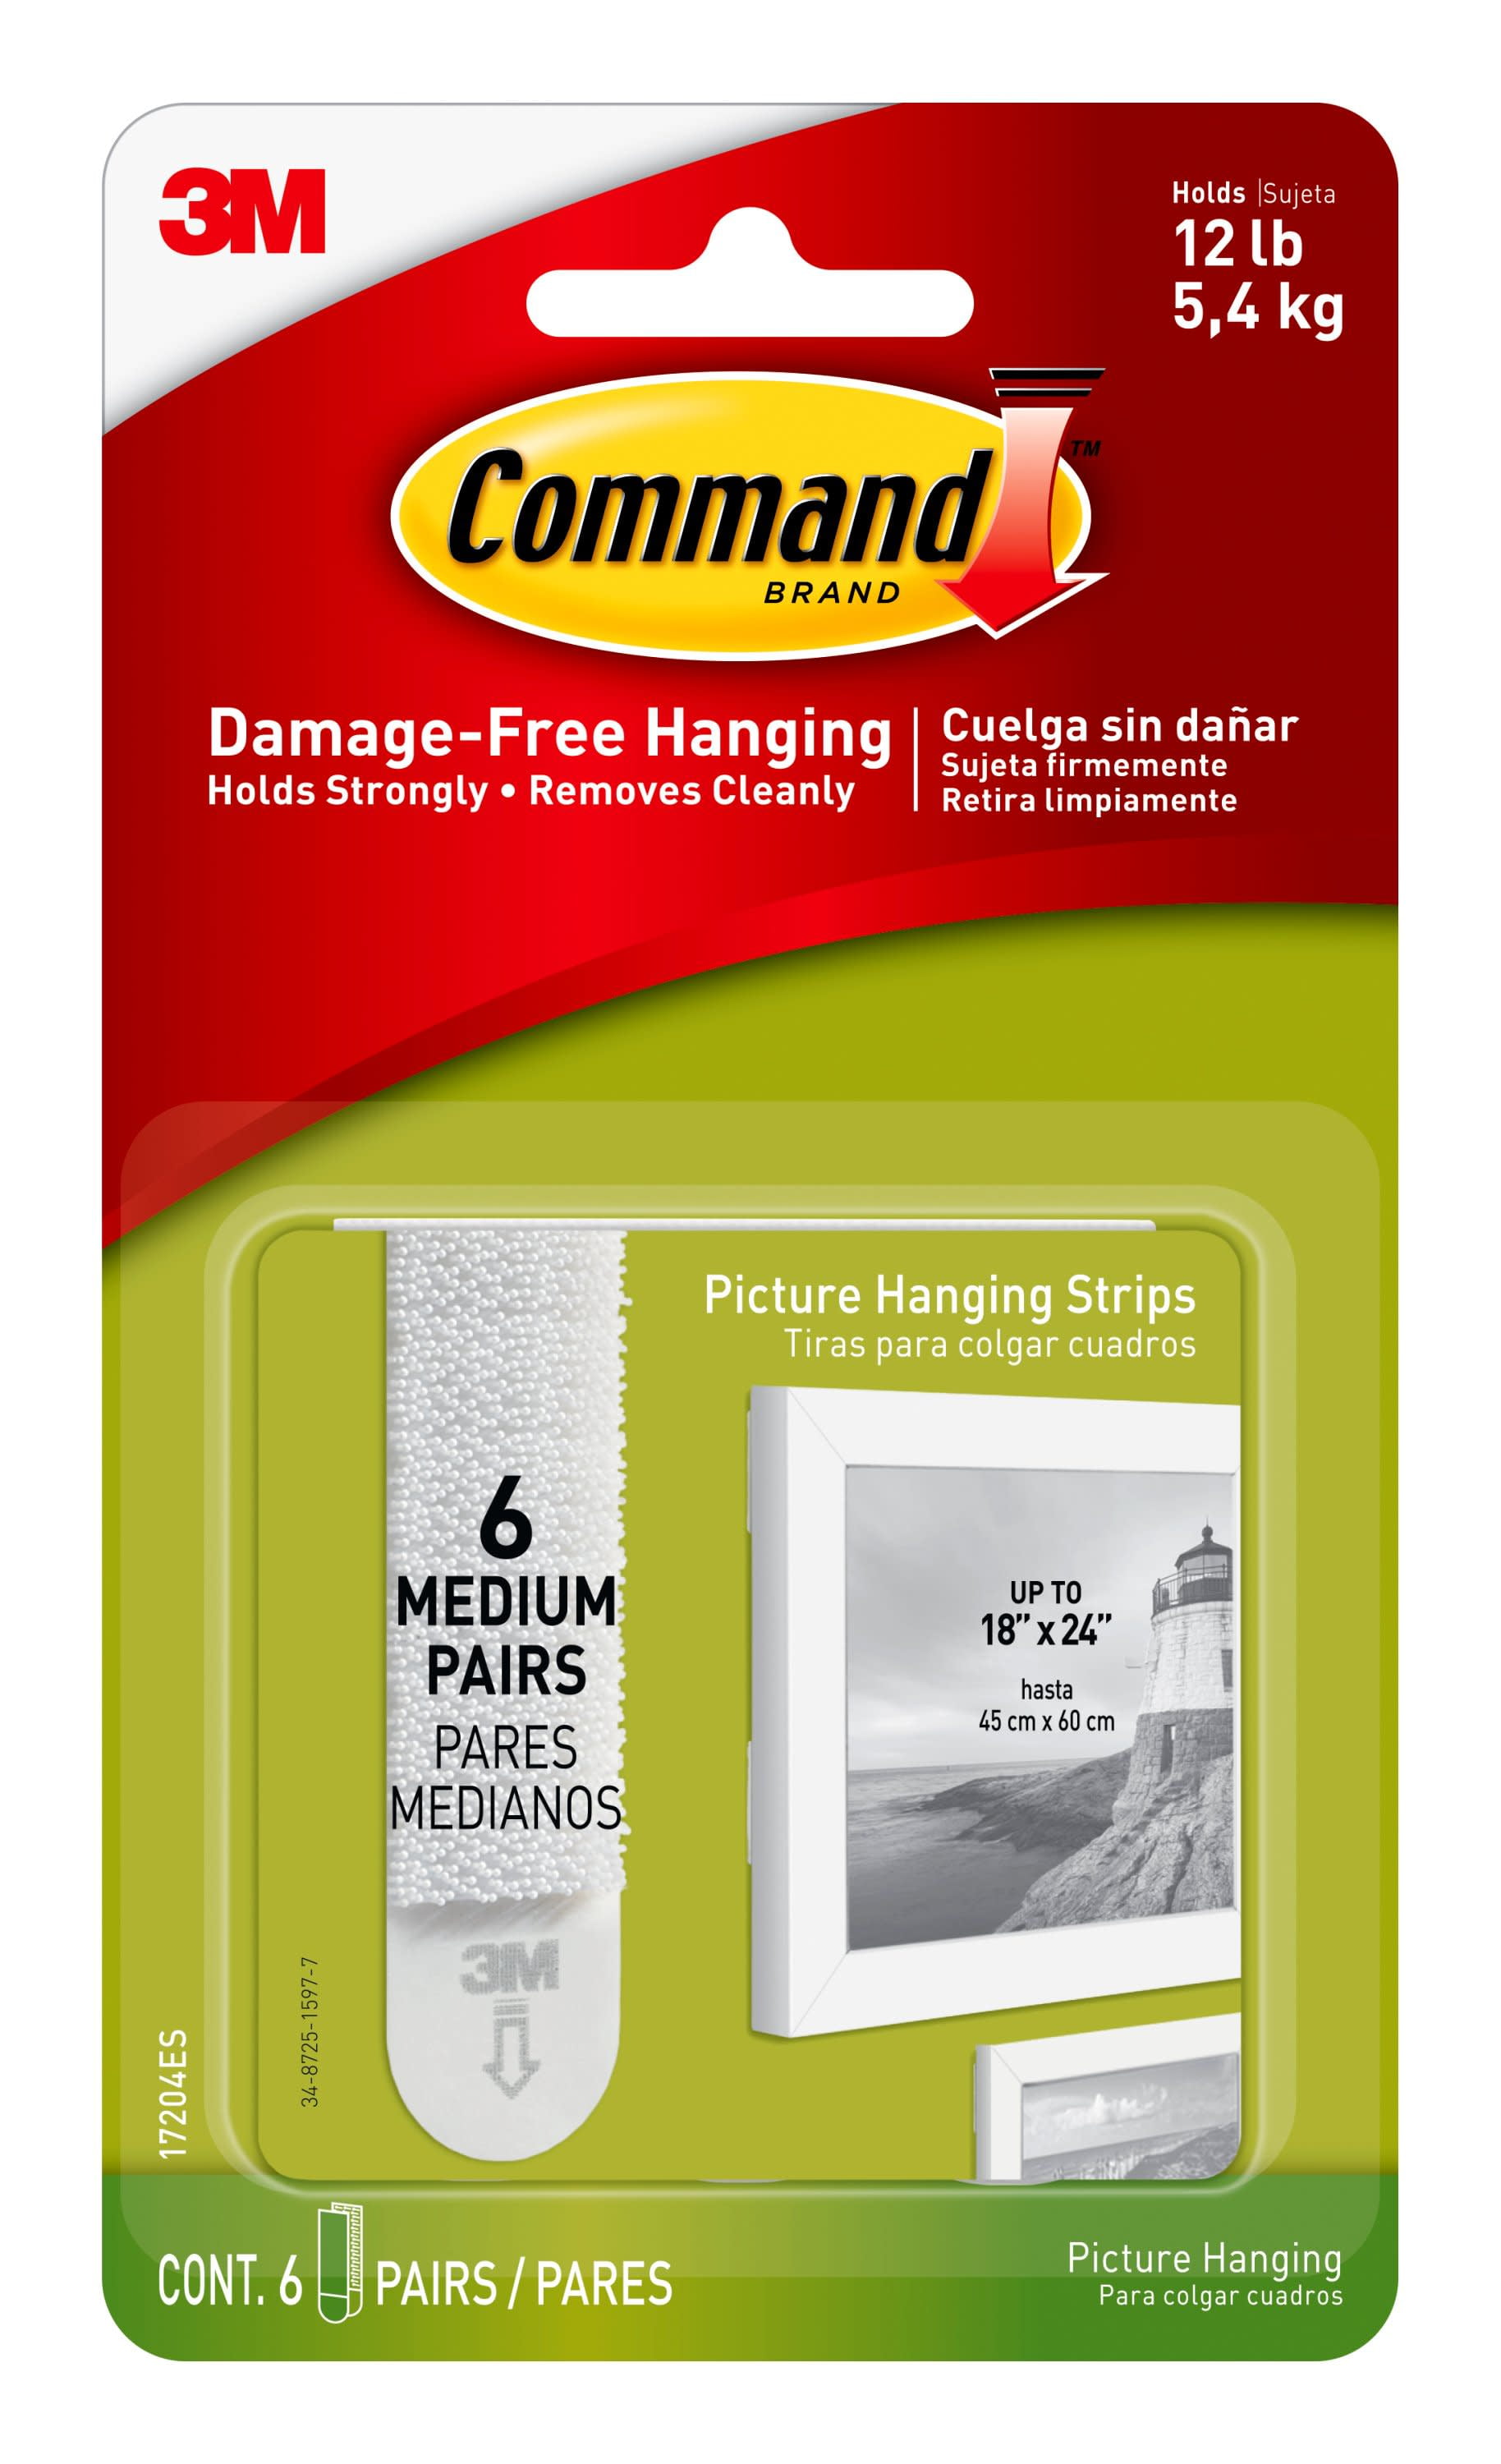 3M Command Brand Picture Hanging Strips*6 Med Pairs*Holds 12lbs*No Damage Wall